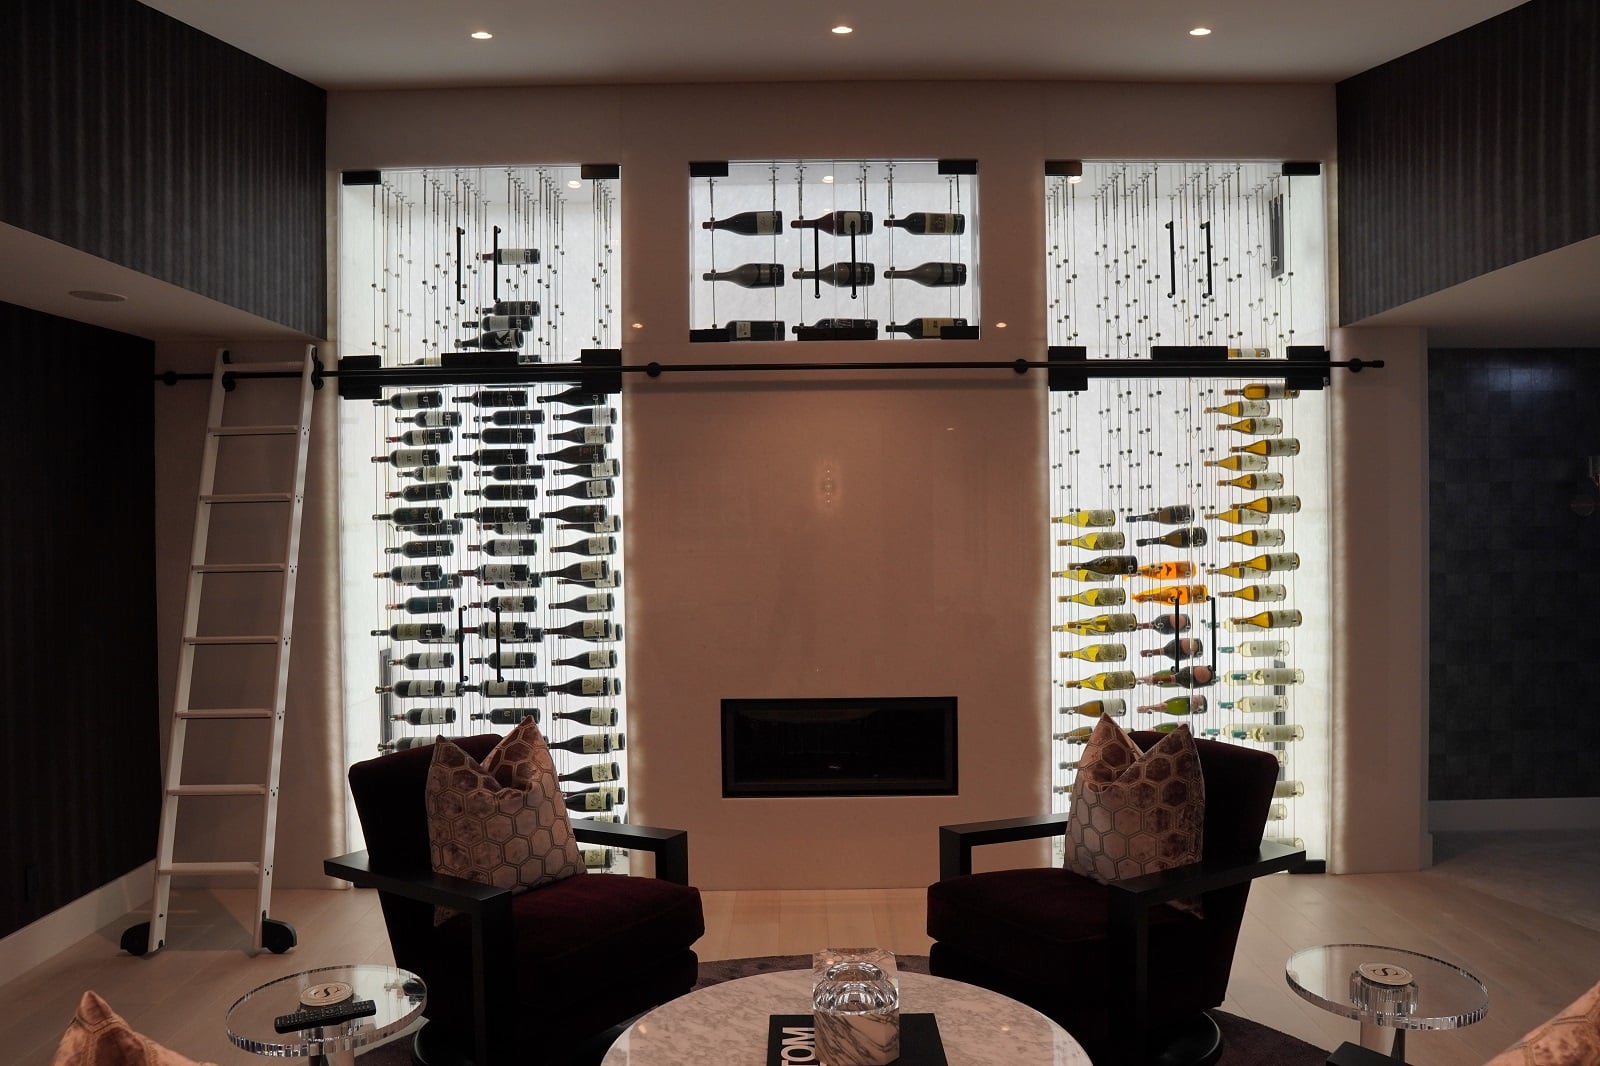 This is how an entire wine cabinet looks with IronWine Cellars cable racks and our acrylic LED light wall.